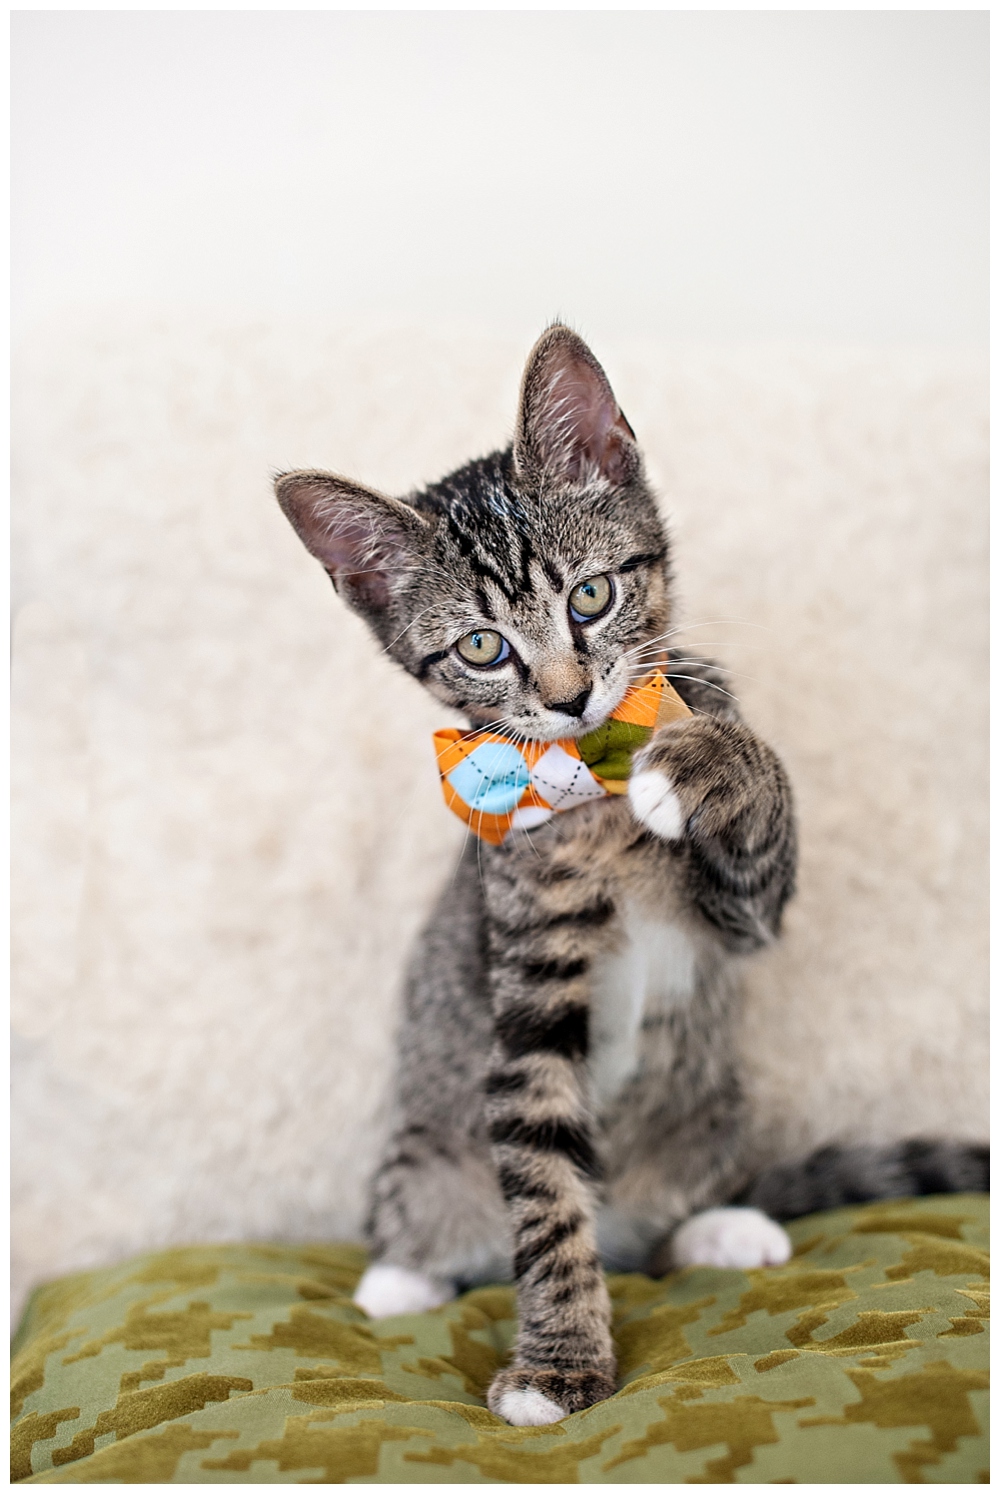 tiger striped kitten with a bow tie